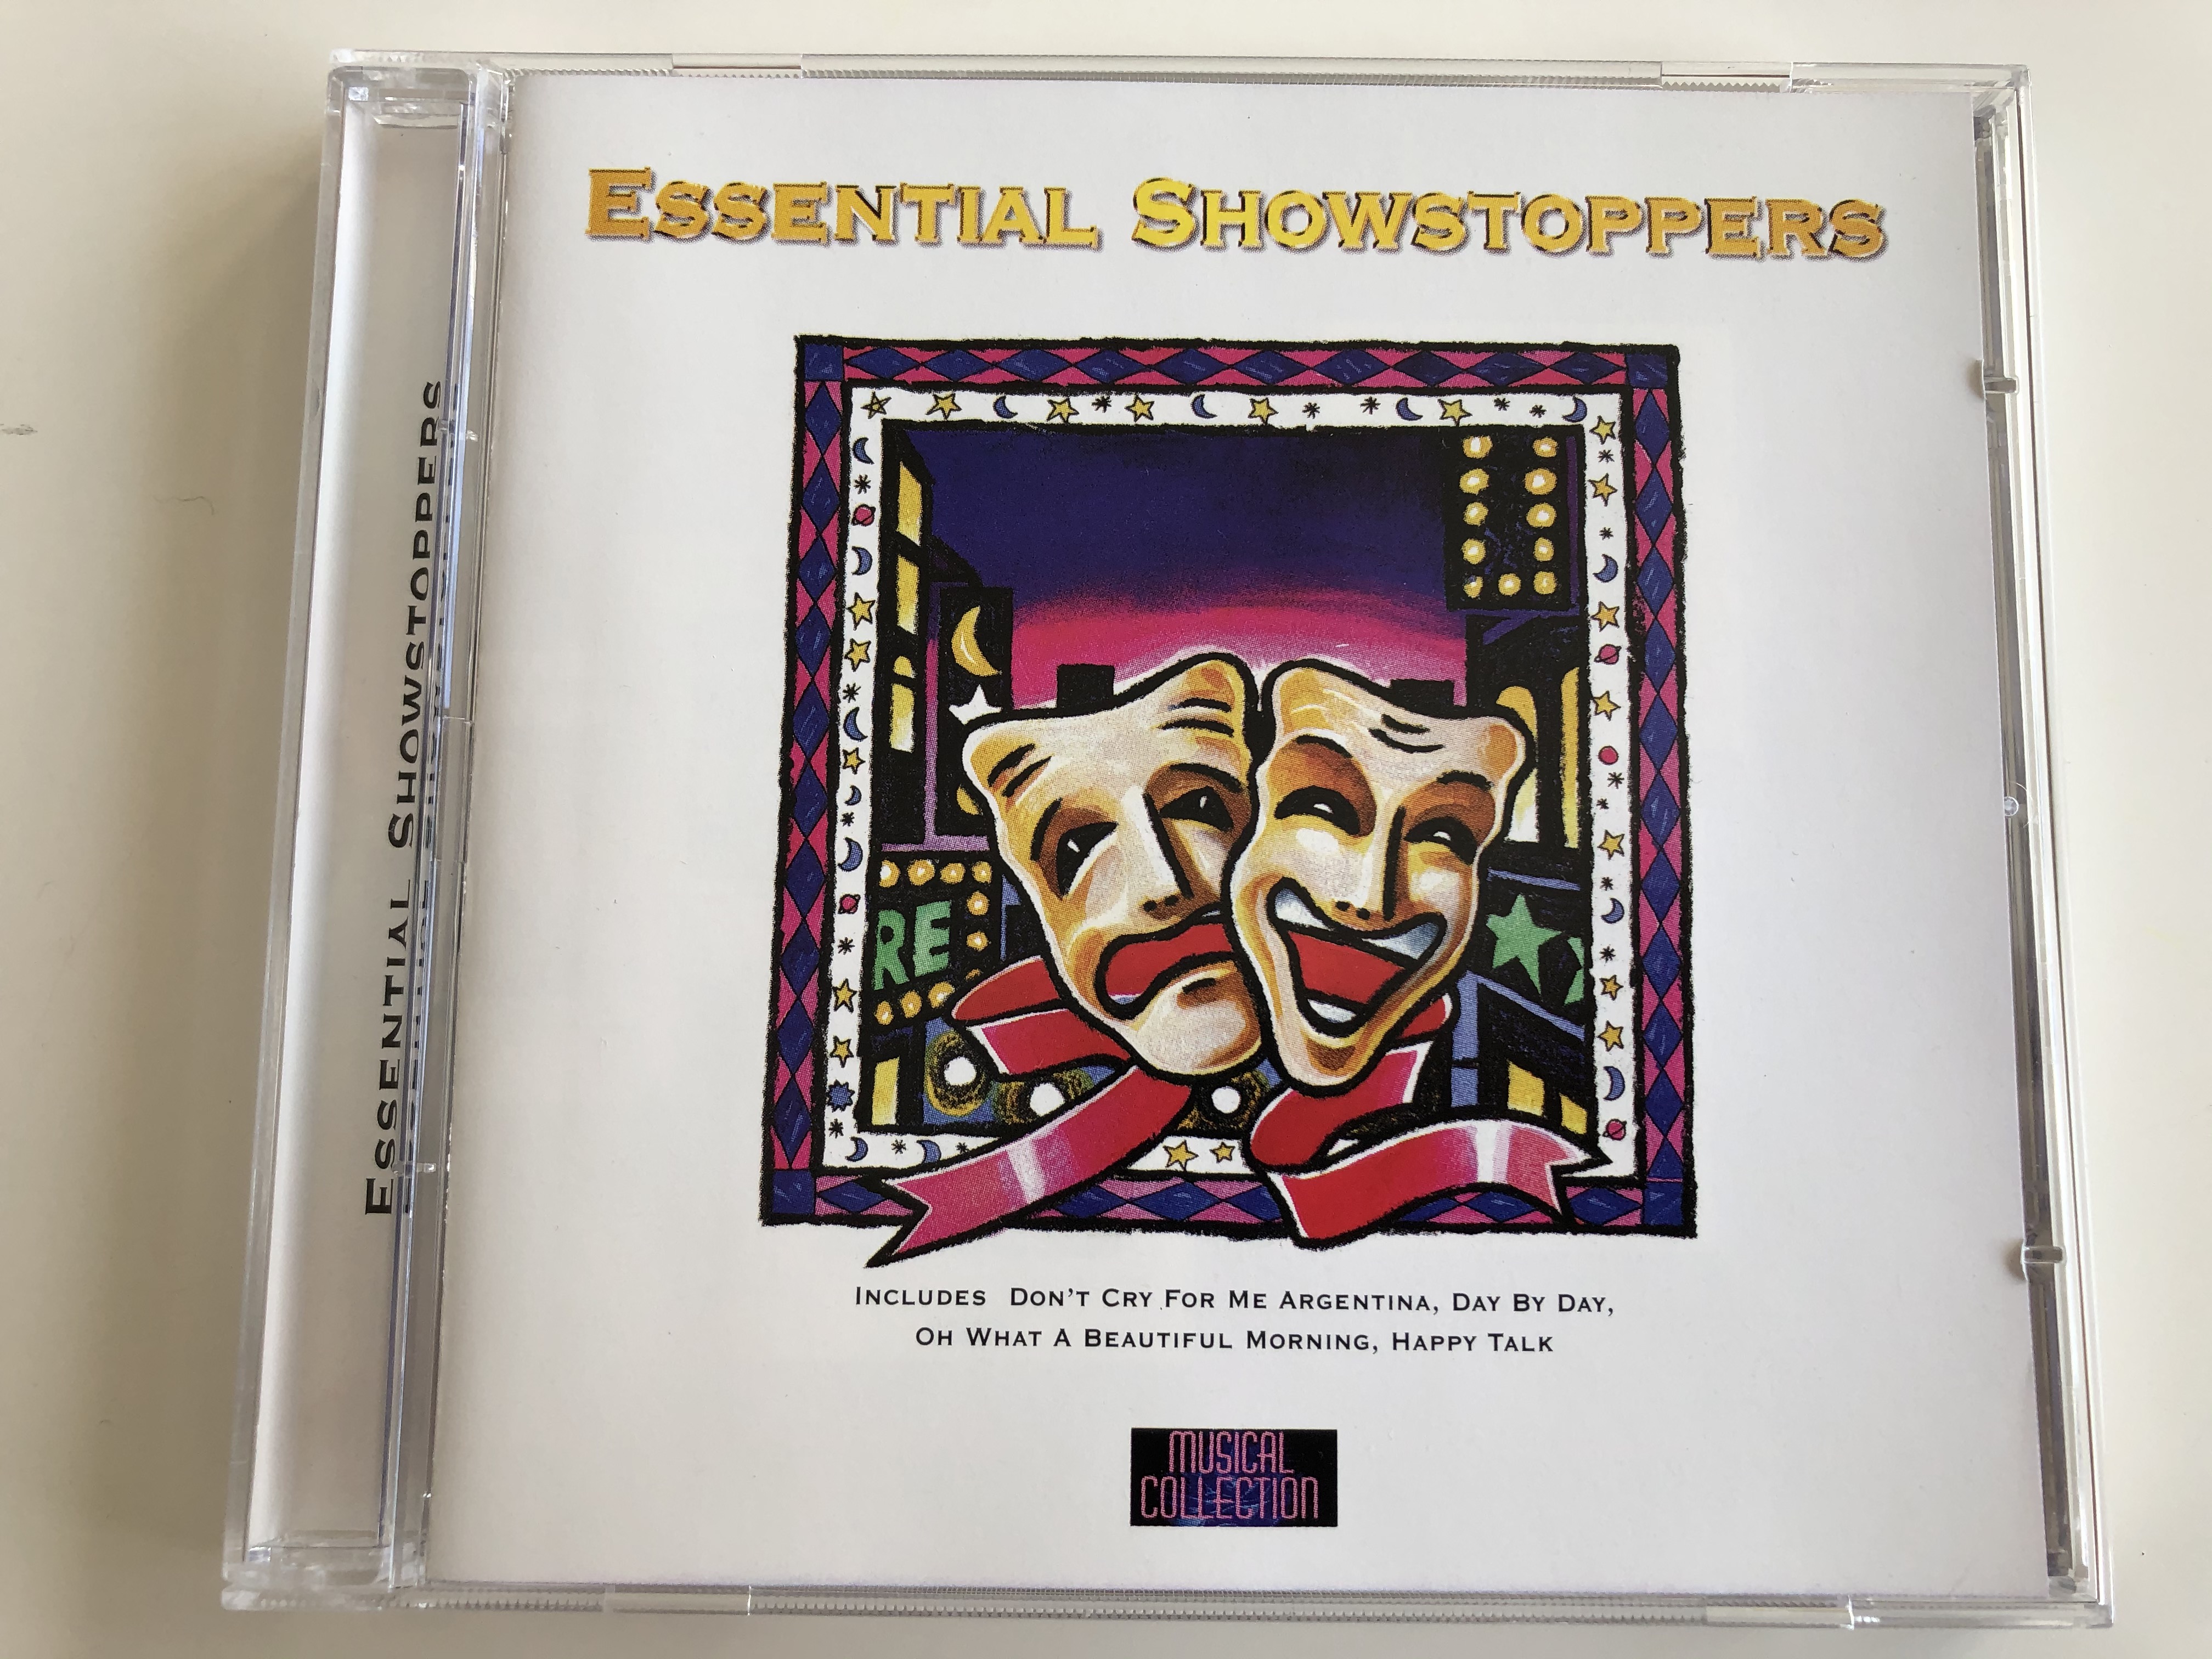 esential-showstoppers-includes-don-t-cry-for-me-argentina-day-by-day-oh-what-a-beautiful-morning-happy-talk-bellevue-entertainment-audio-cd-1997-8540-2-1-.jpg